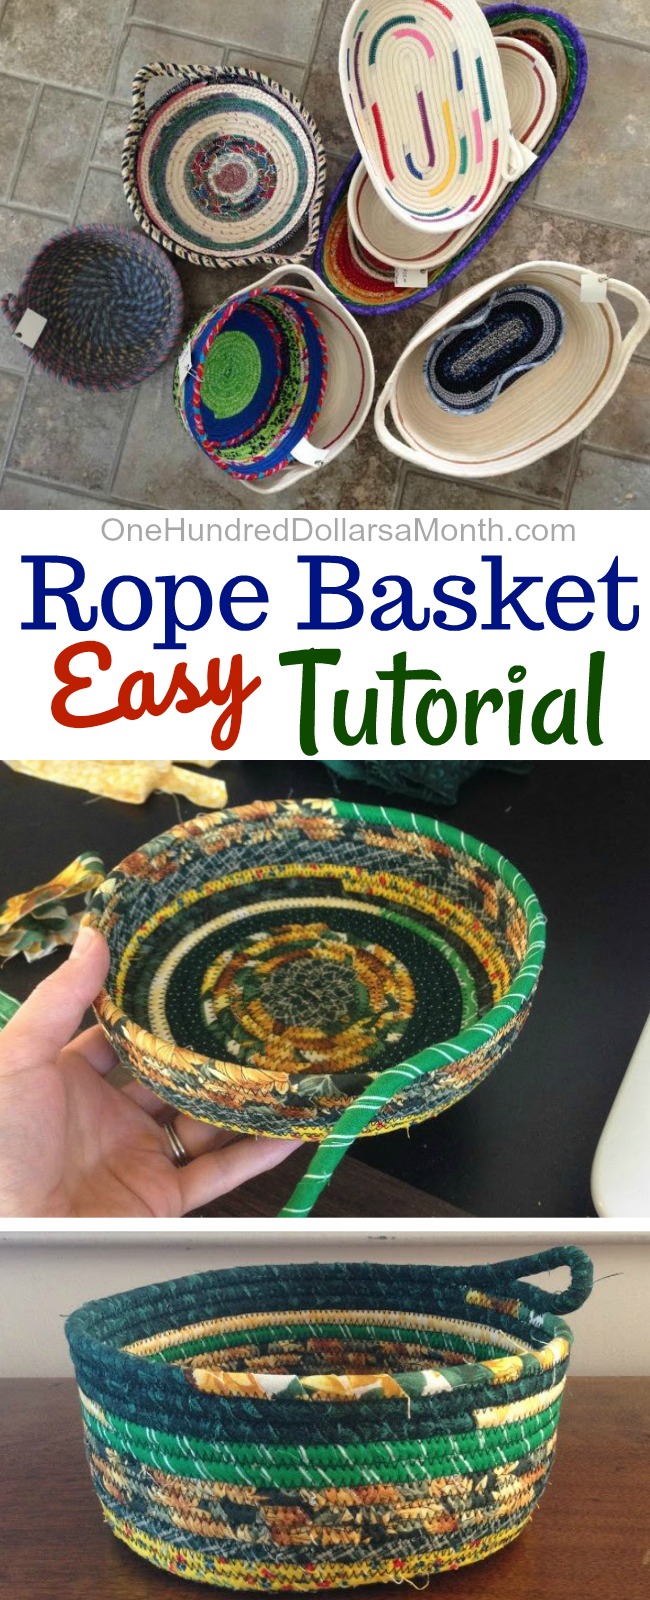 How to Make a Rope Basket